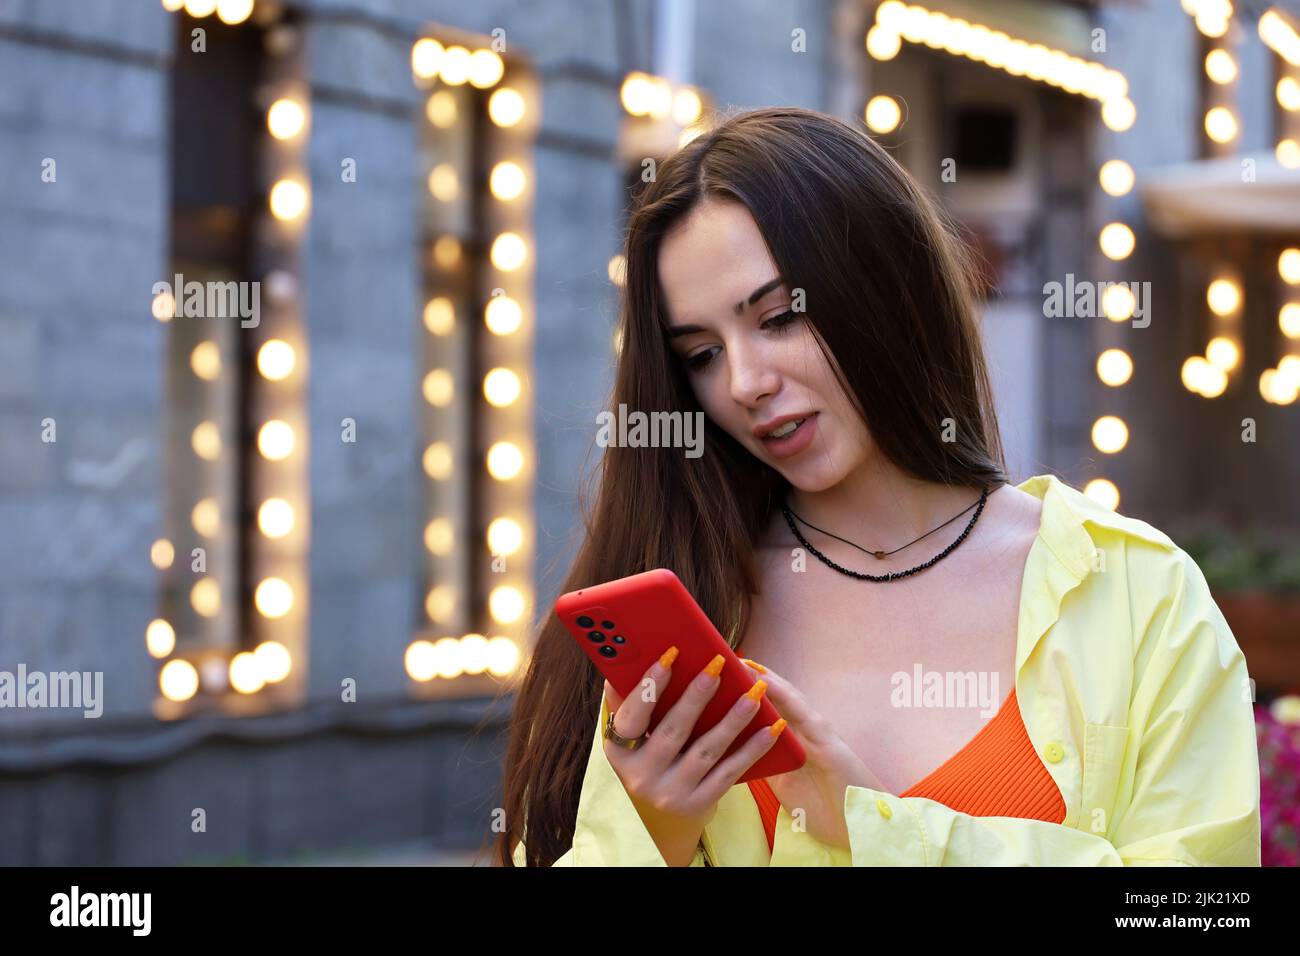 Smiling young girl with long hair and perfect makeup using smartphone on a street on festive lights background. Female beauty, online communication Stock Photo